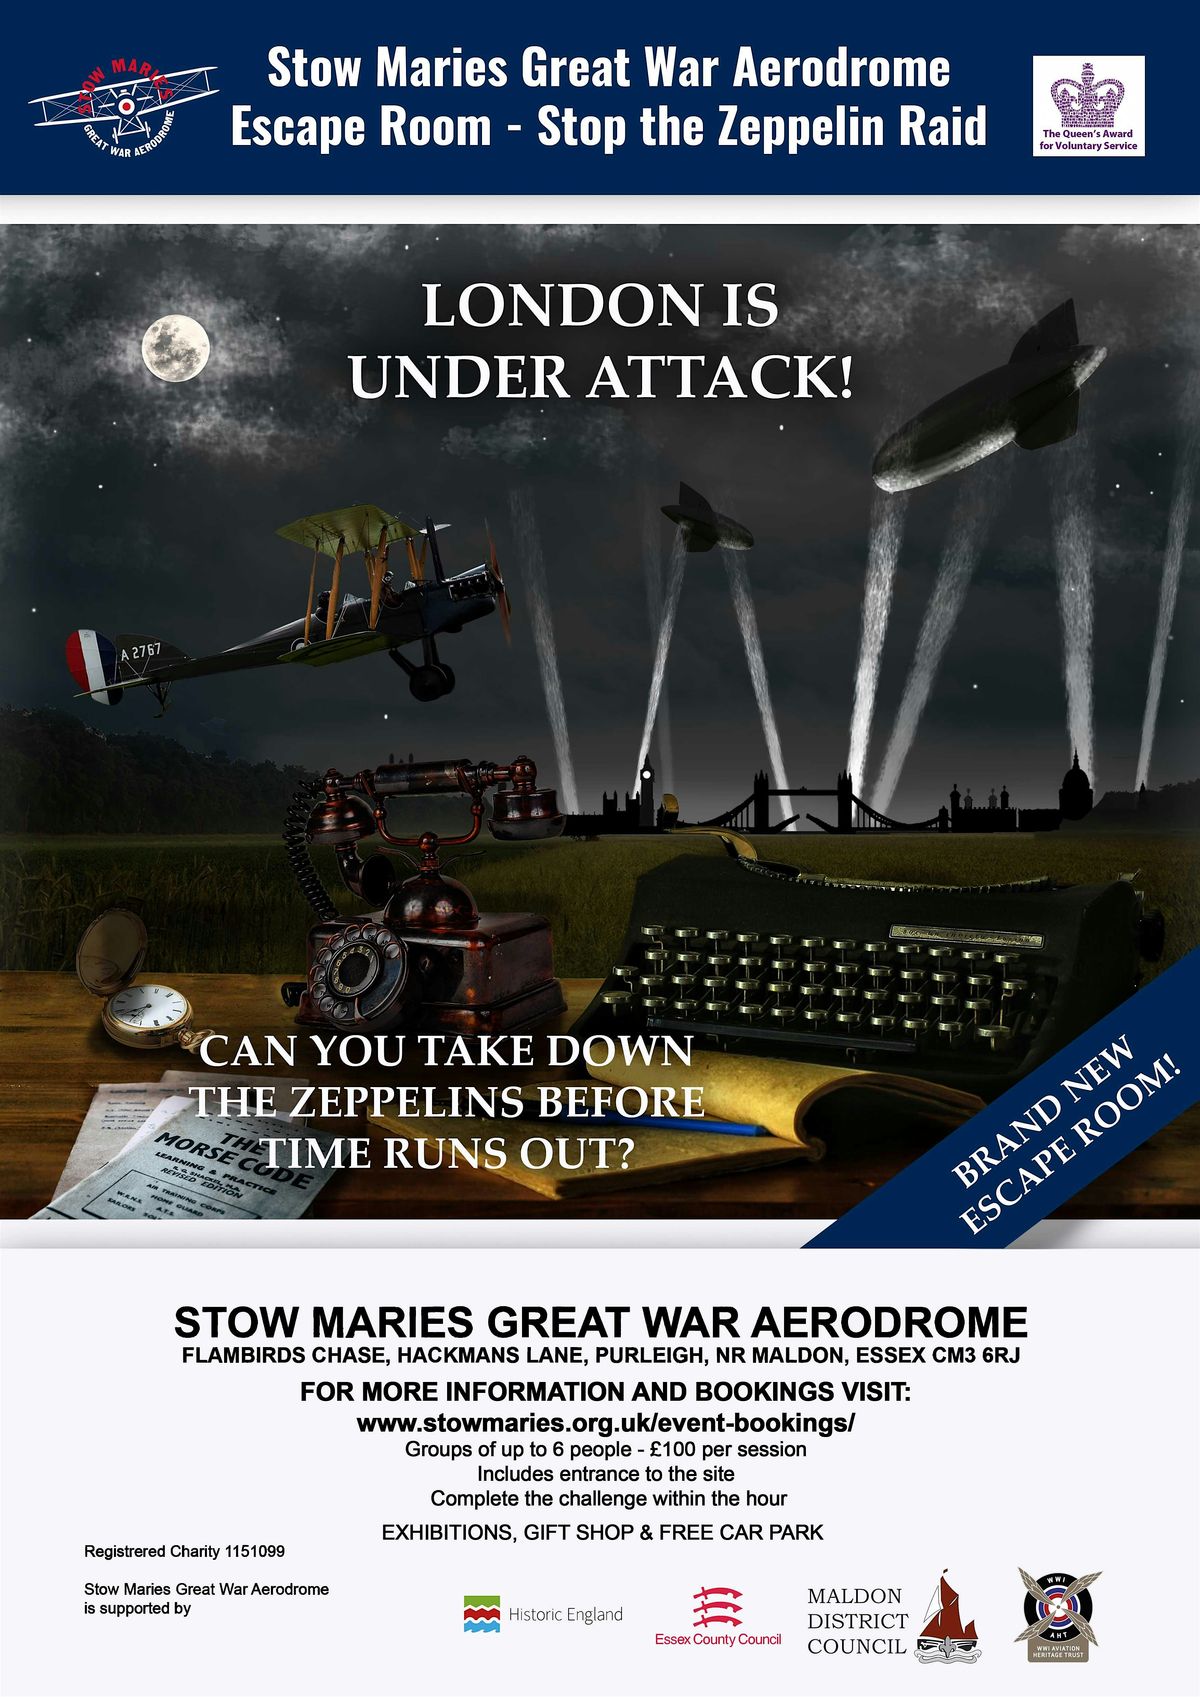 Stow Maries Great War Aerodrome Escape Room Experience 18 May